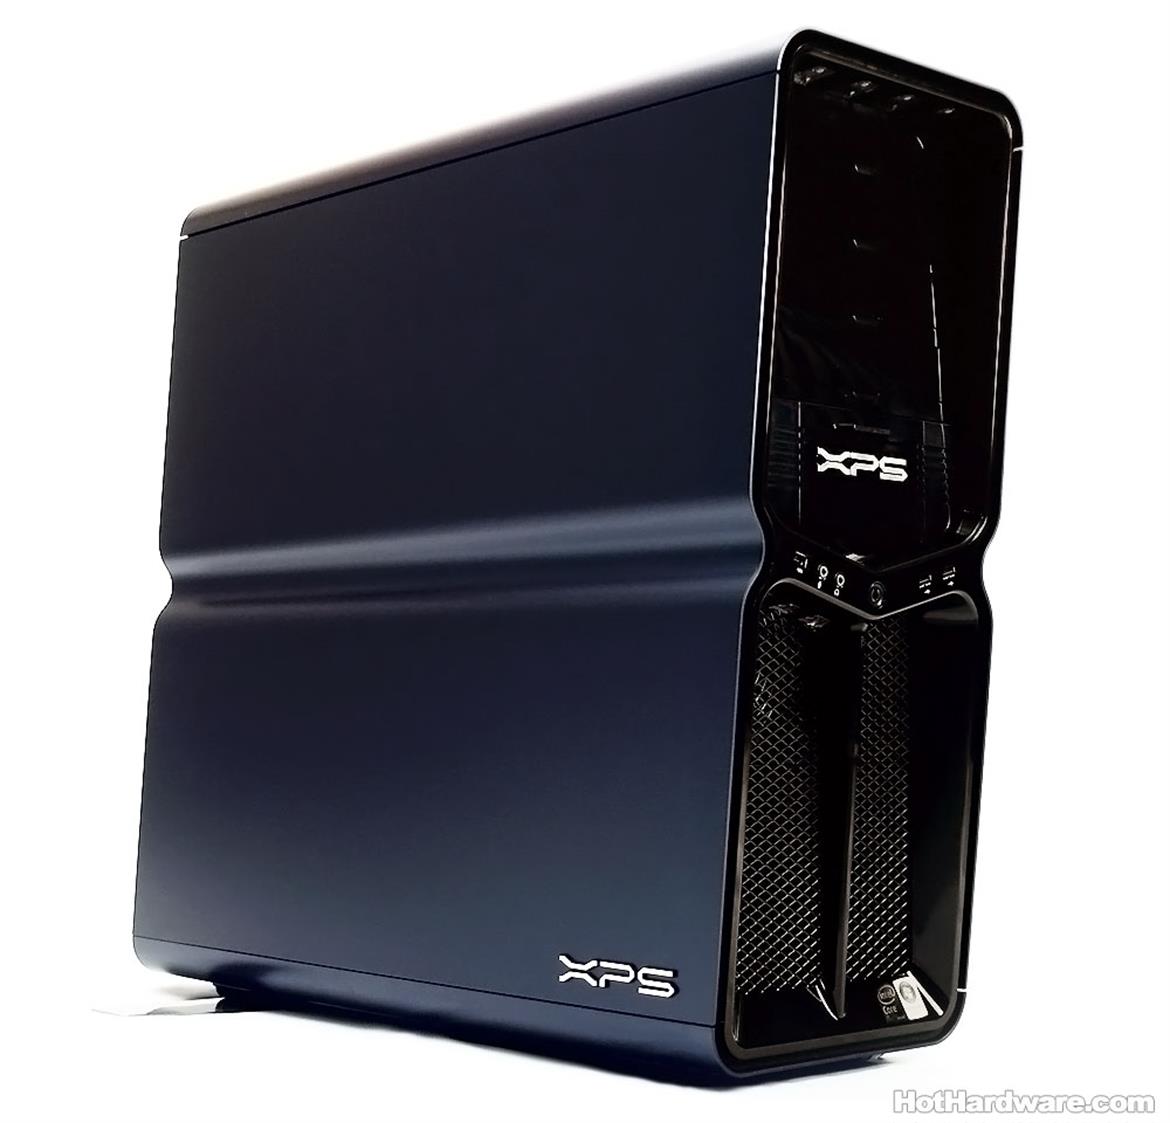 Dell XPS 730x H2C Intel Core i7 Gaming System